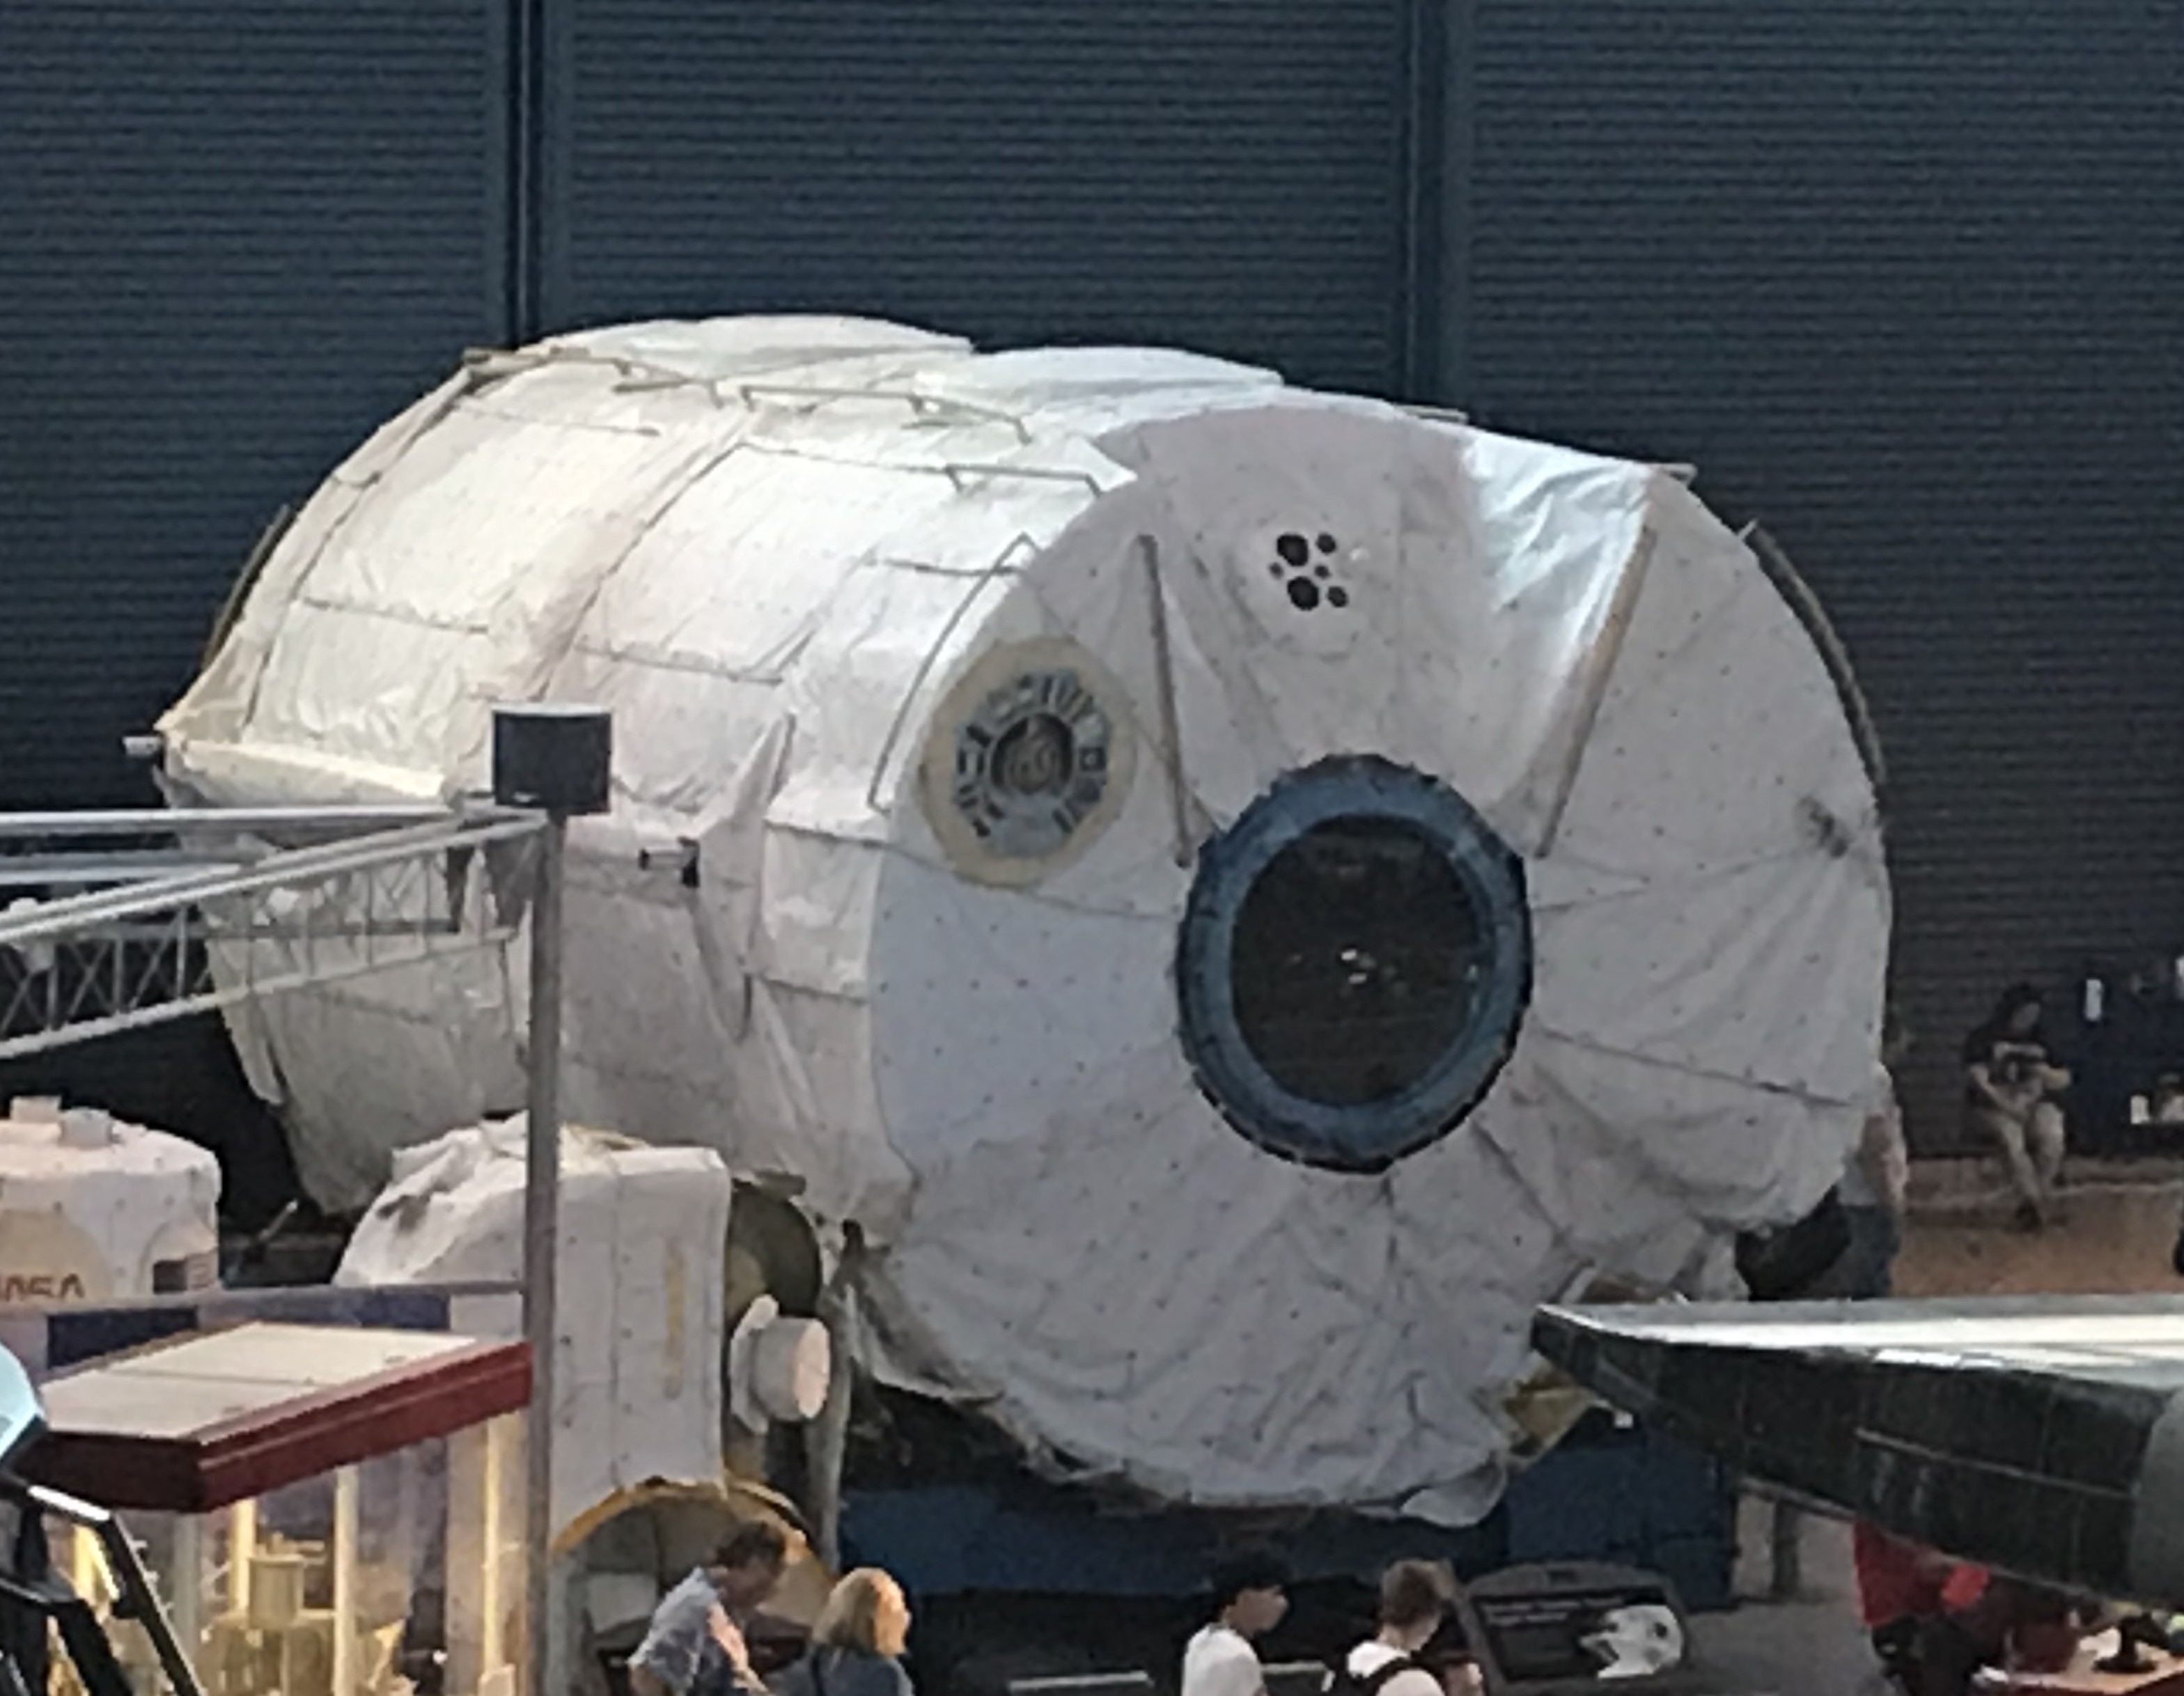 The Spacelab long module that flew on STS-65 and eight other missions on display at the Stephen F. Udvar-Hazy Center of the Smithsonian Institution’s National Air and Space Museum in Chantilly, Virginia.